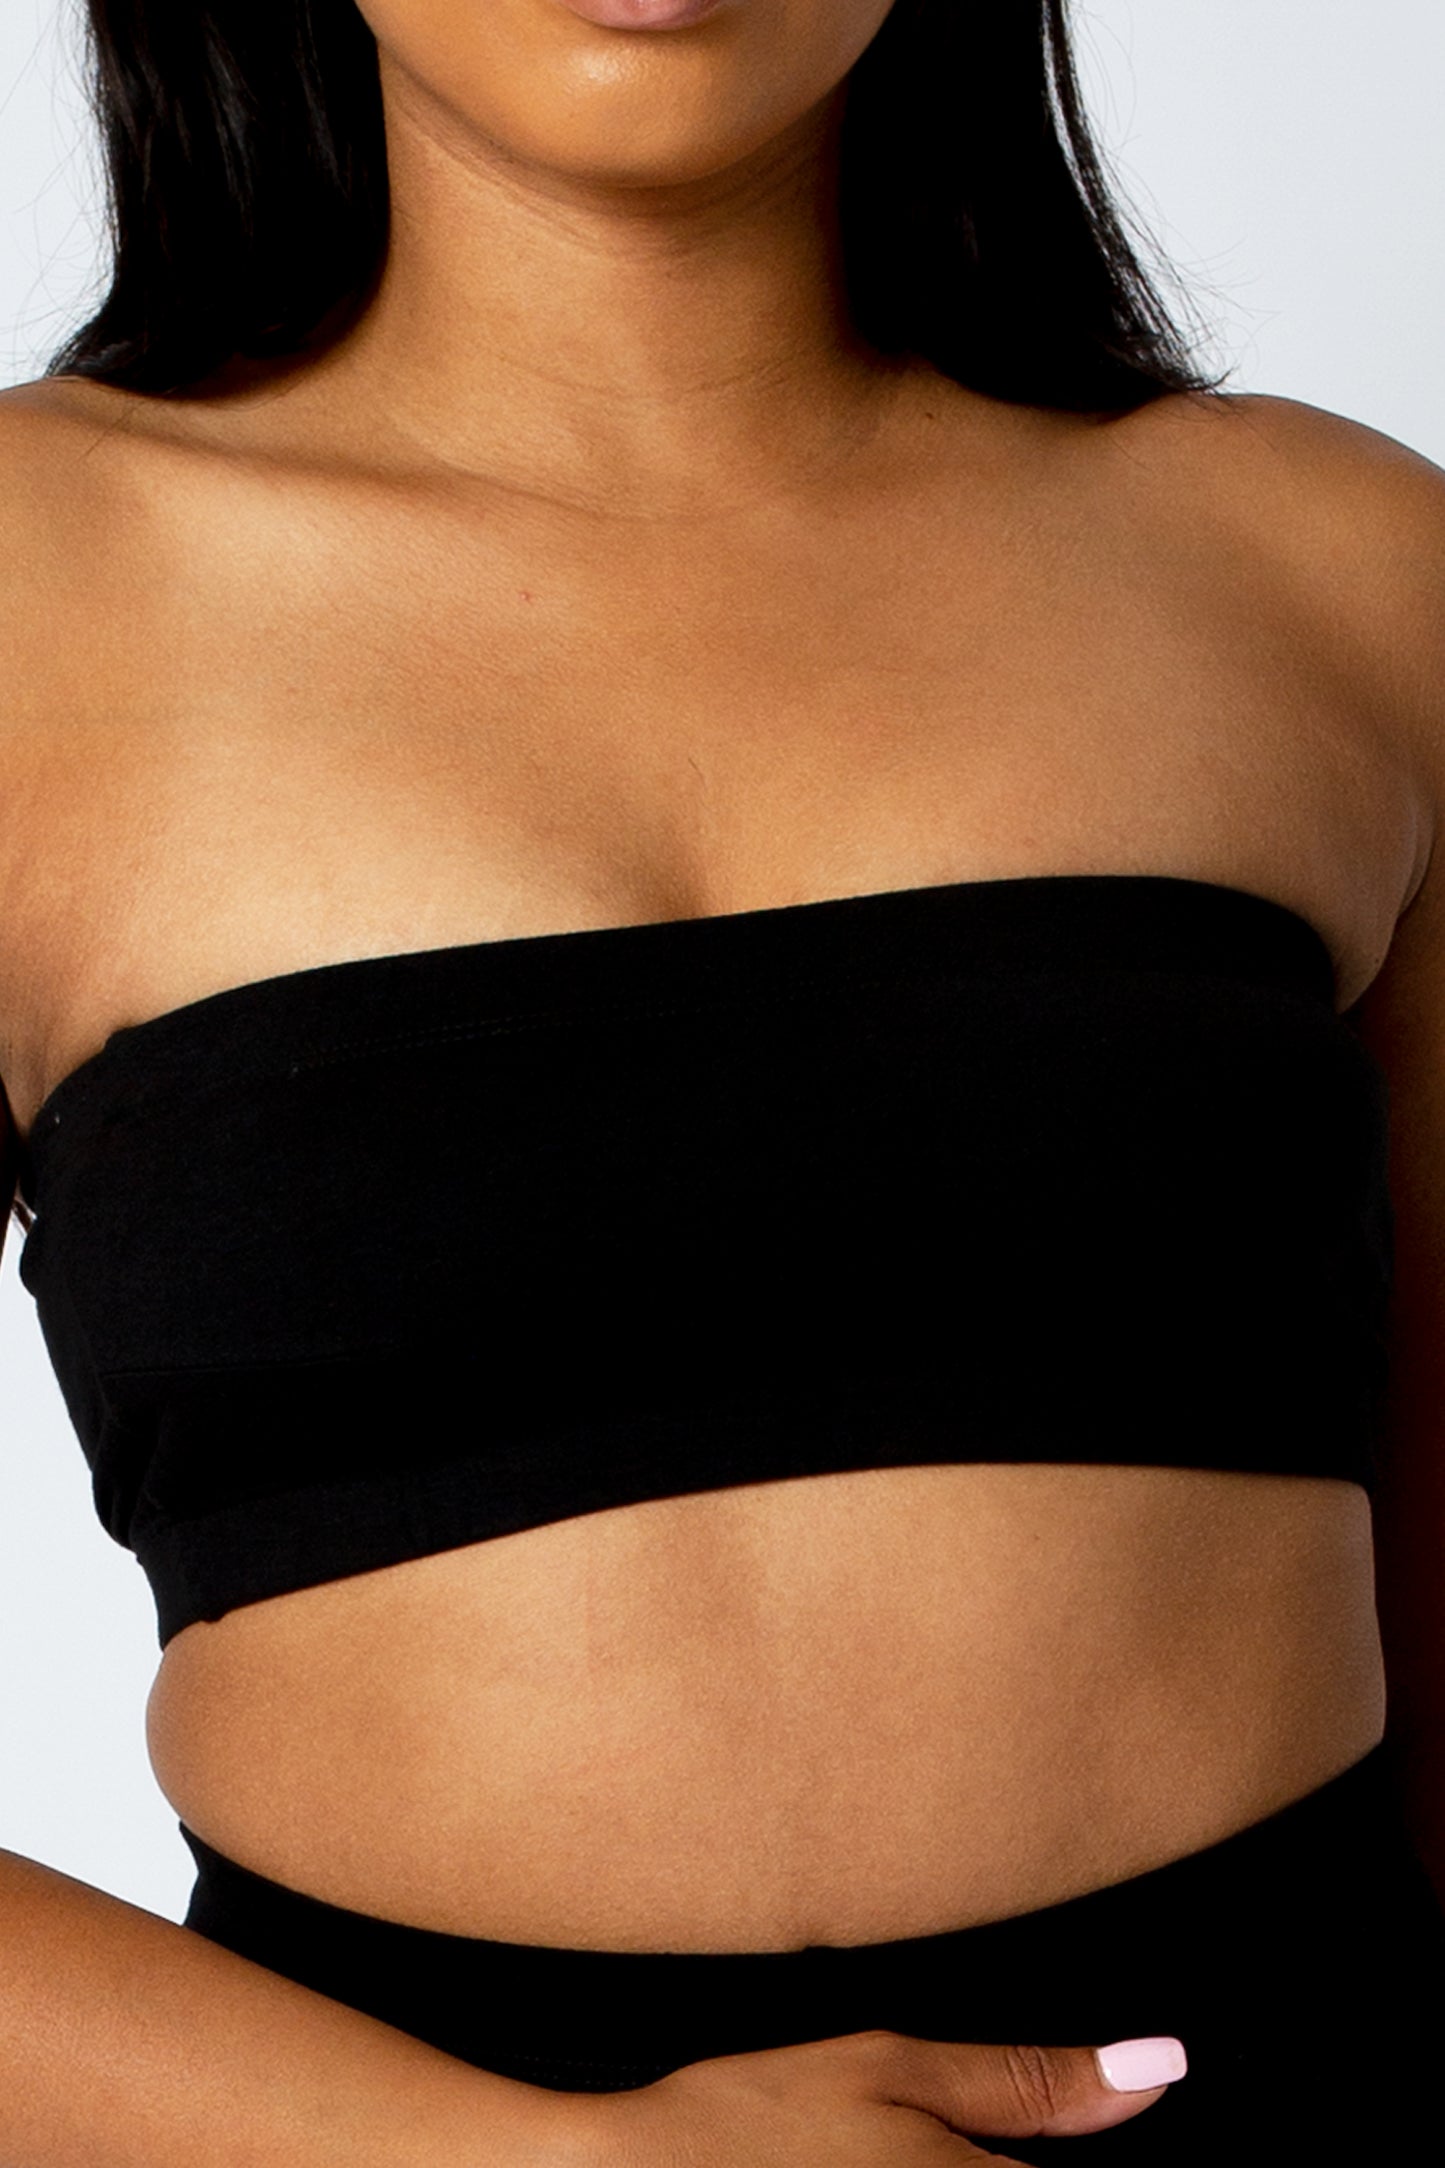 Tube Top-12 Colors